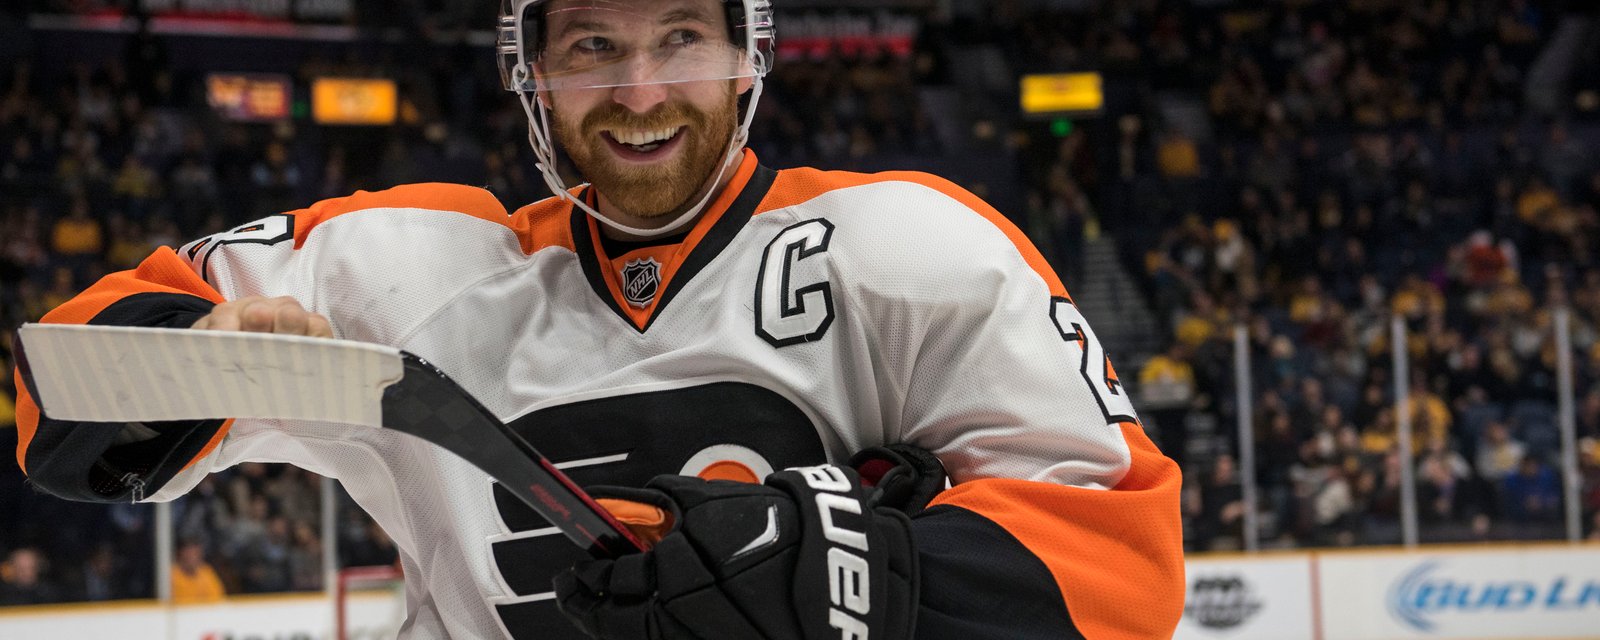 Must See: This Claude Giroux shootout compilation will get Flyers fans ready for the season